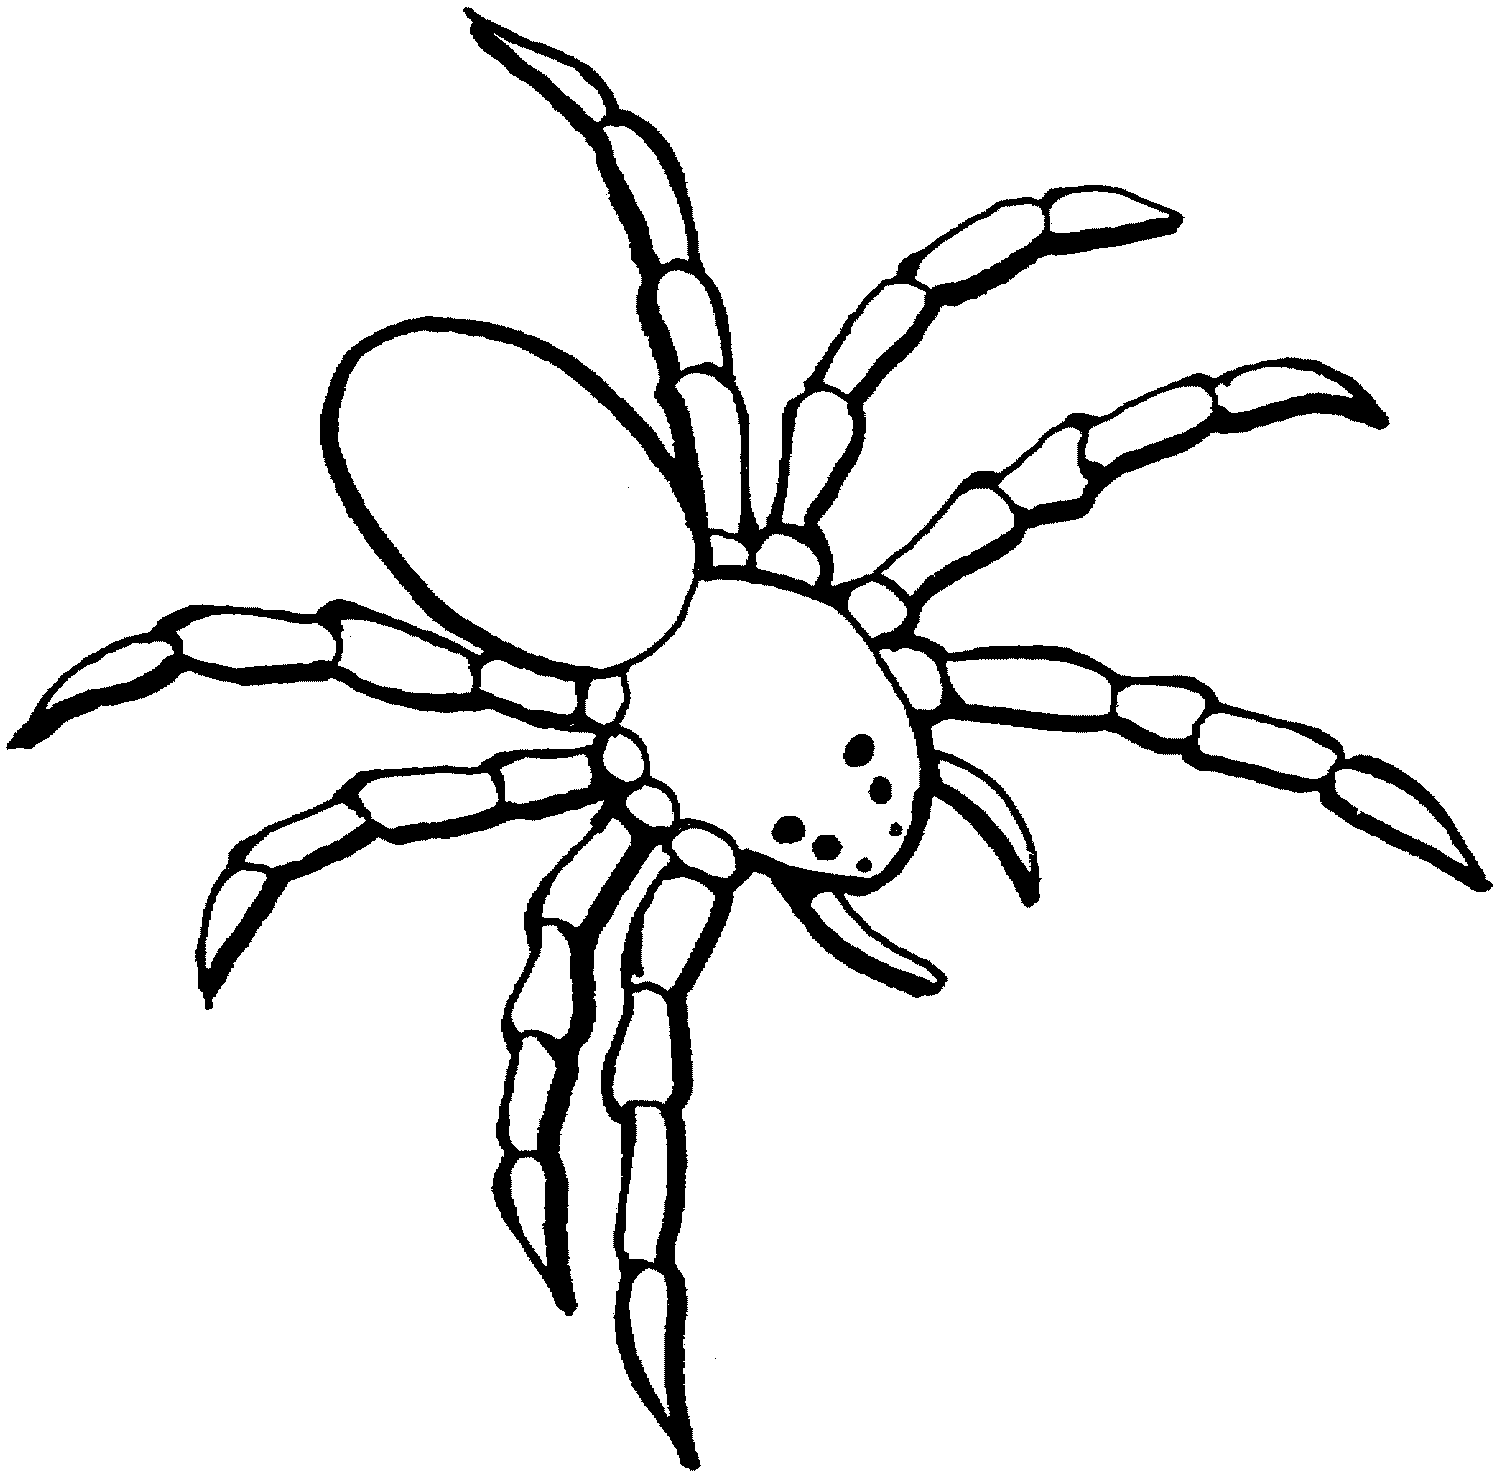 Full Version of Spider Coloring Pages Five Educative Printable